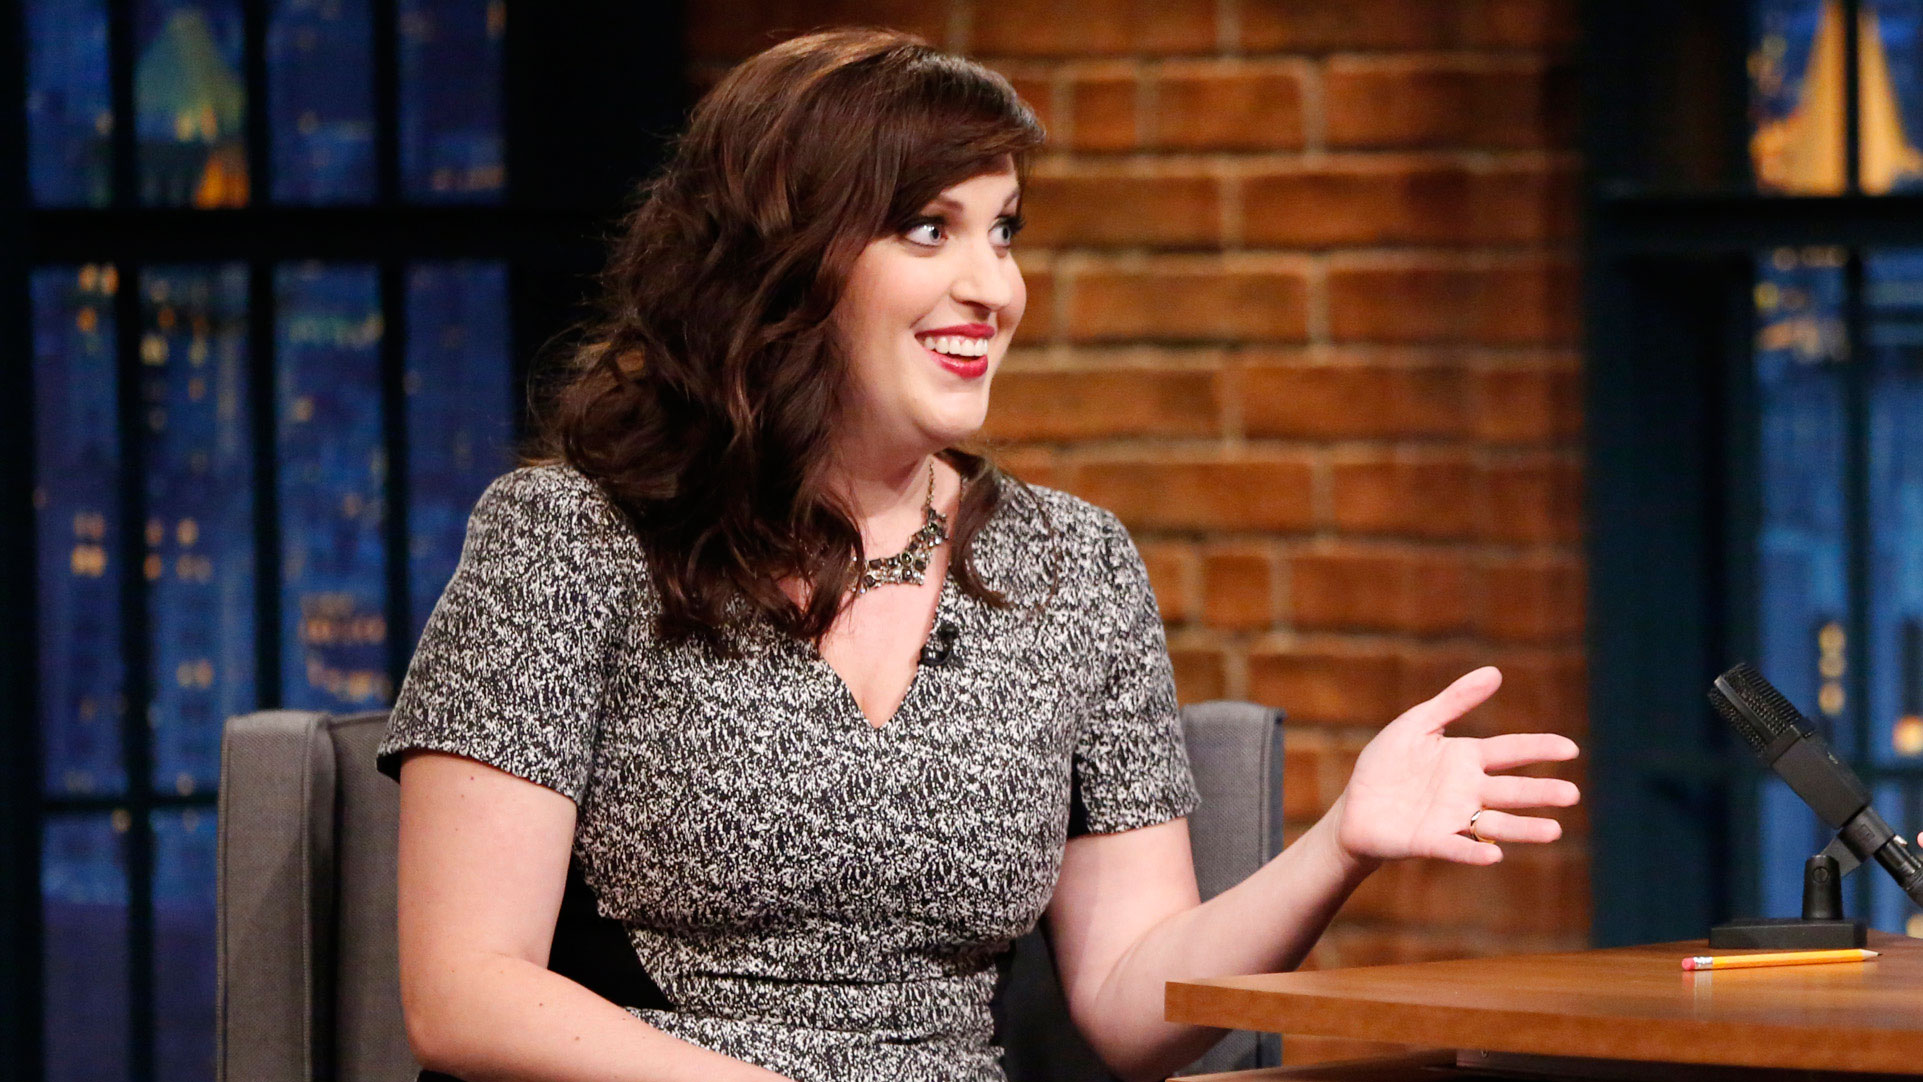 Watch Late Night with Seth Meyers Interview: Allison Tolman and David Koech...